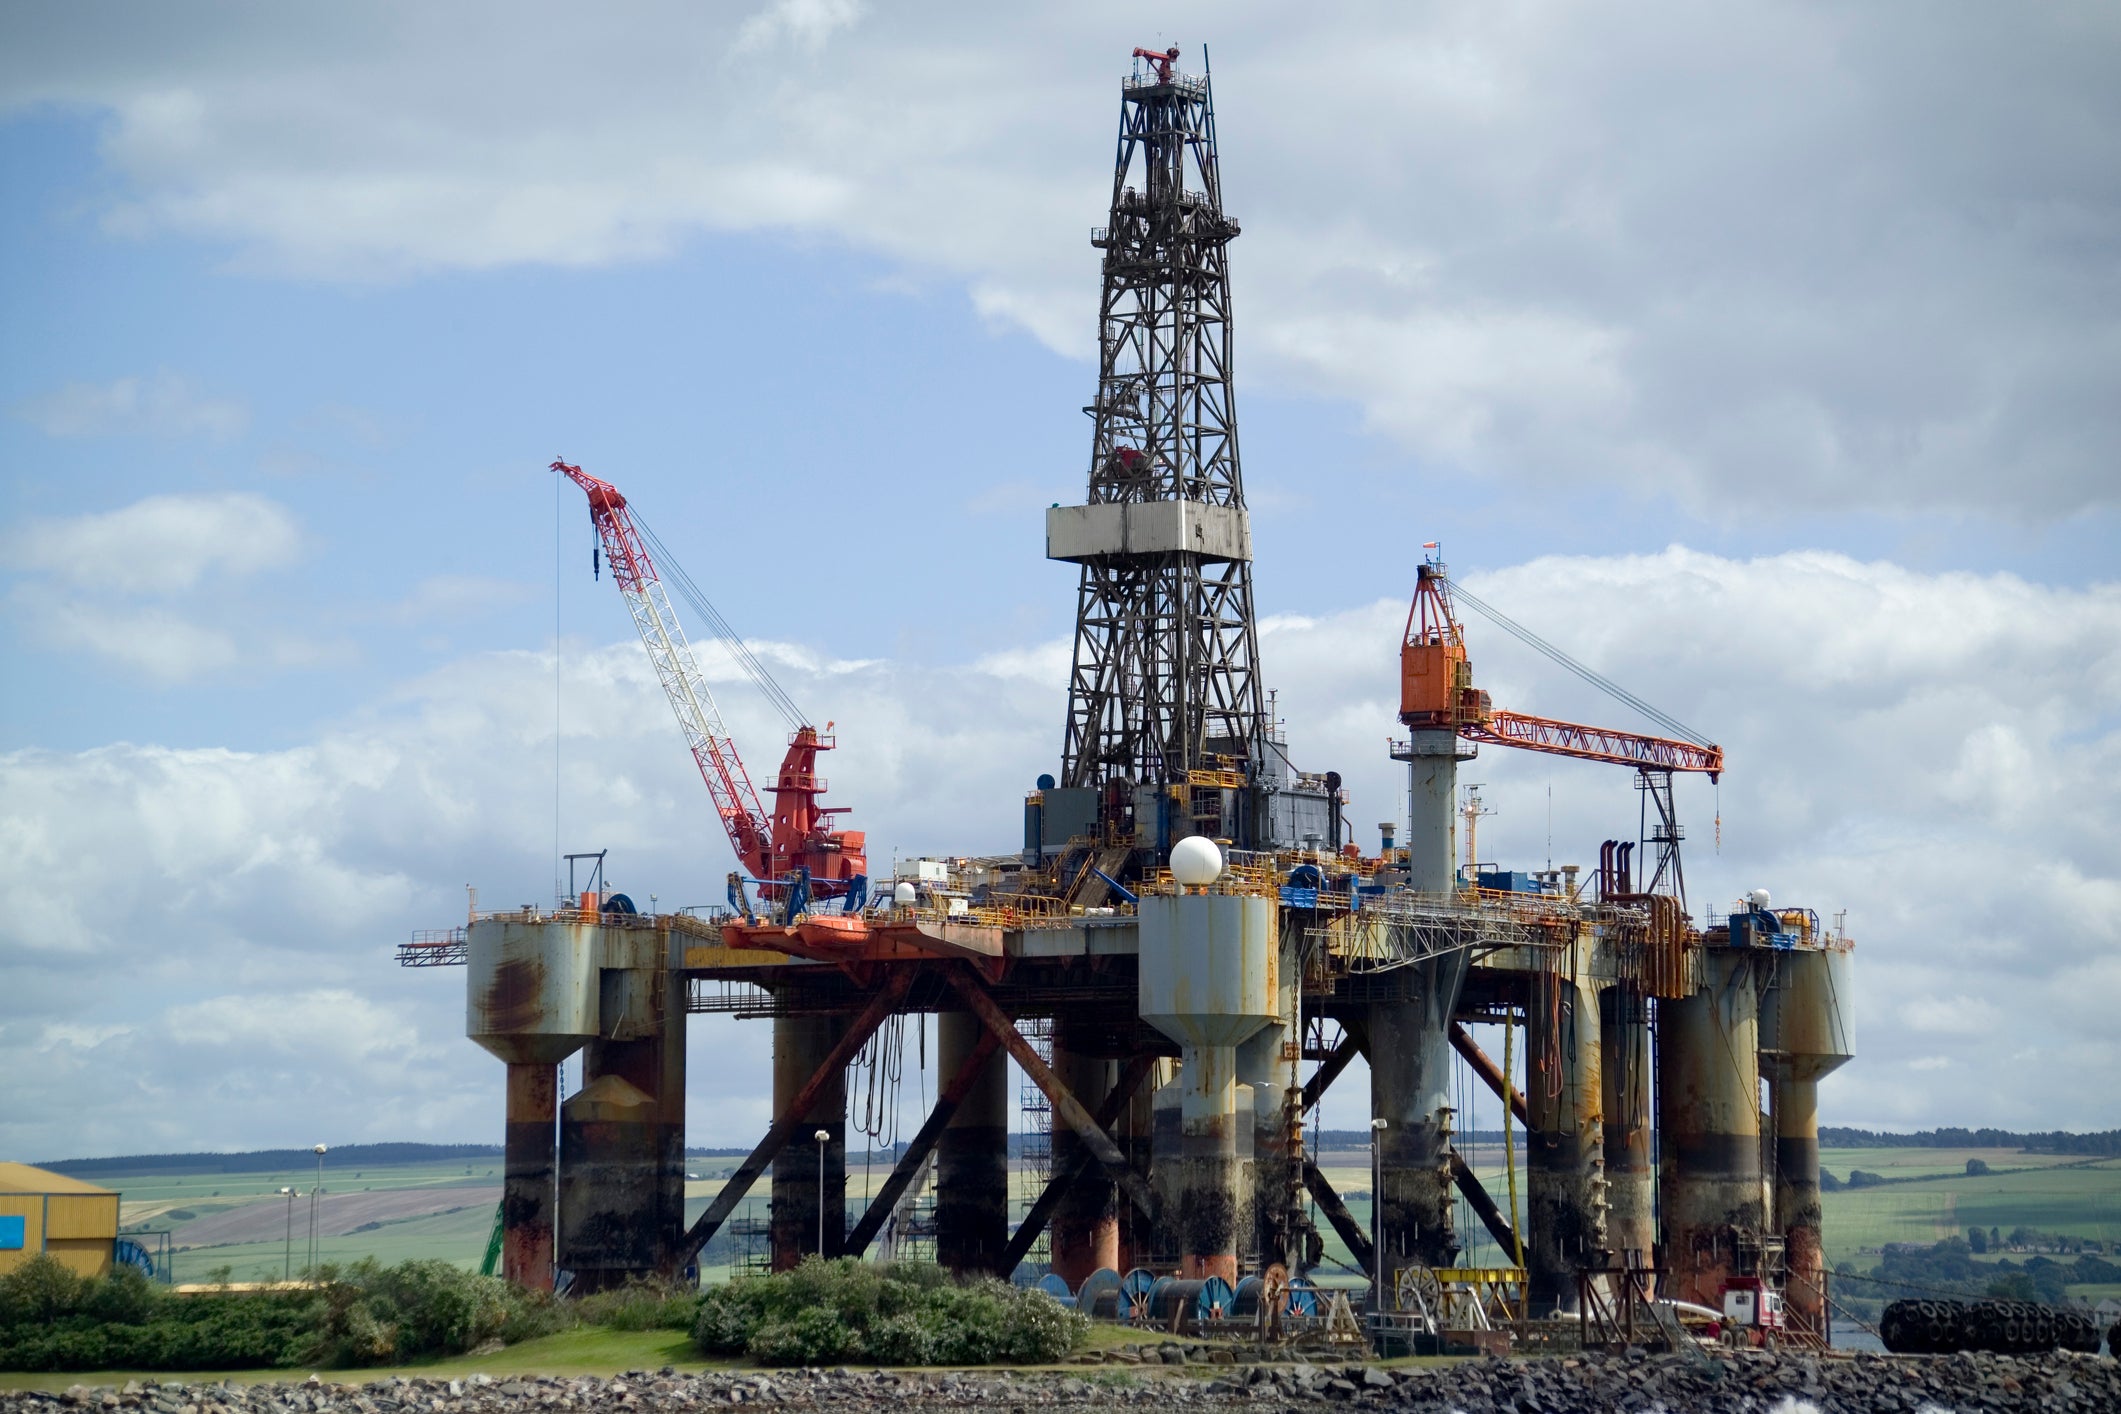 The government is planning to issue new licences for oil and gas drilling